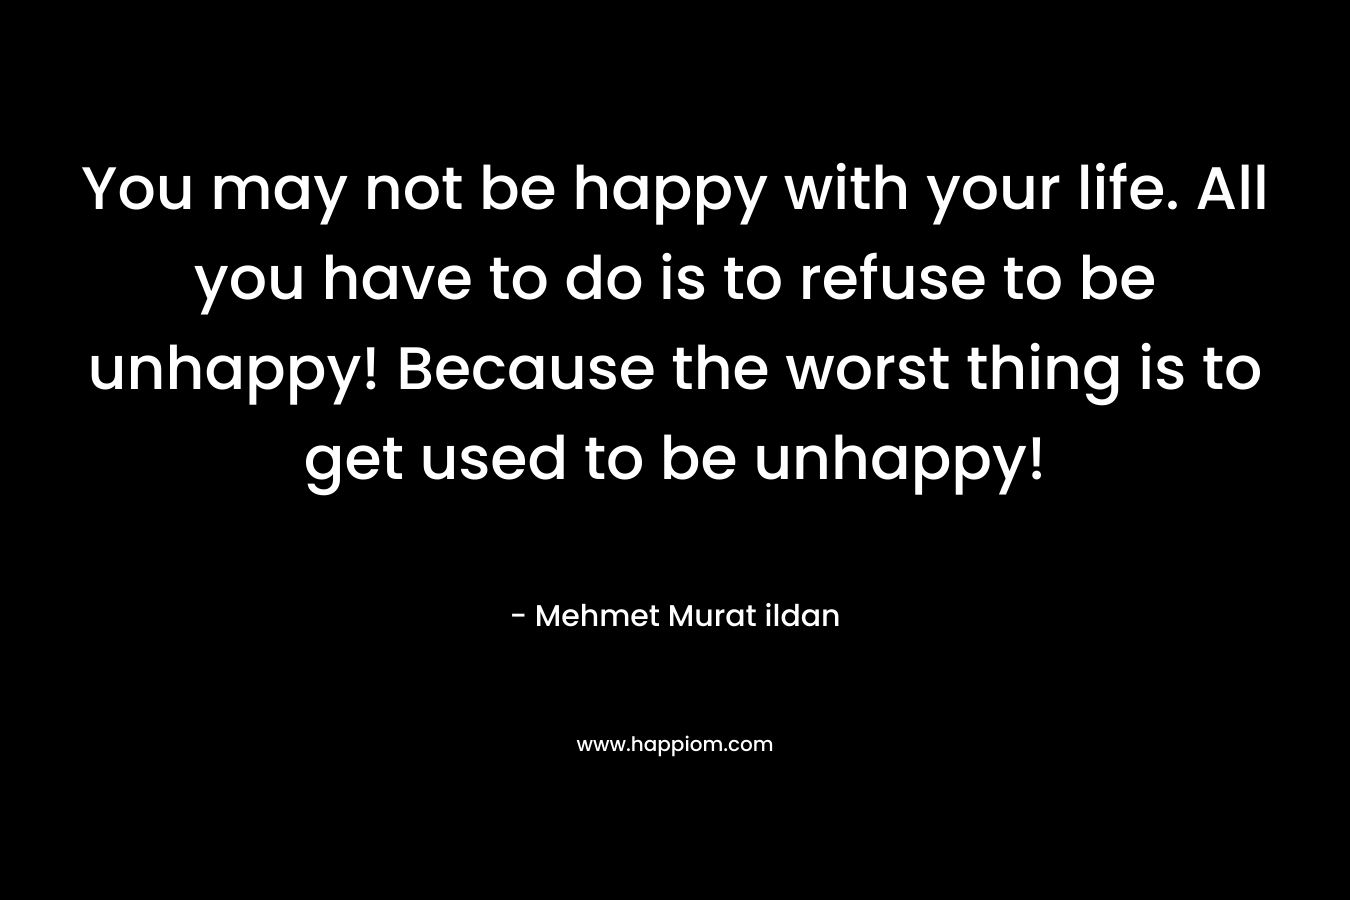 You may not be happy with your life. All you have to do is to refuse to be unhappy! Because the worst thing is to get used to be unhappy!